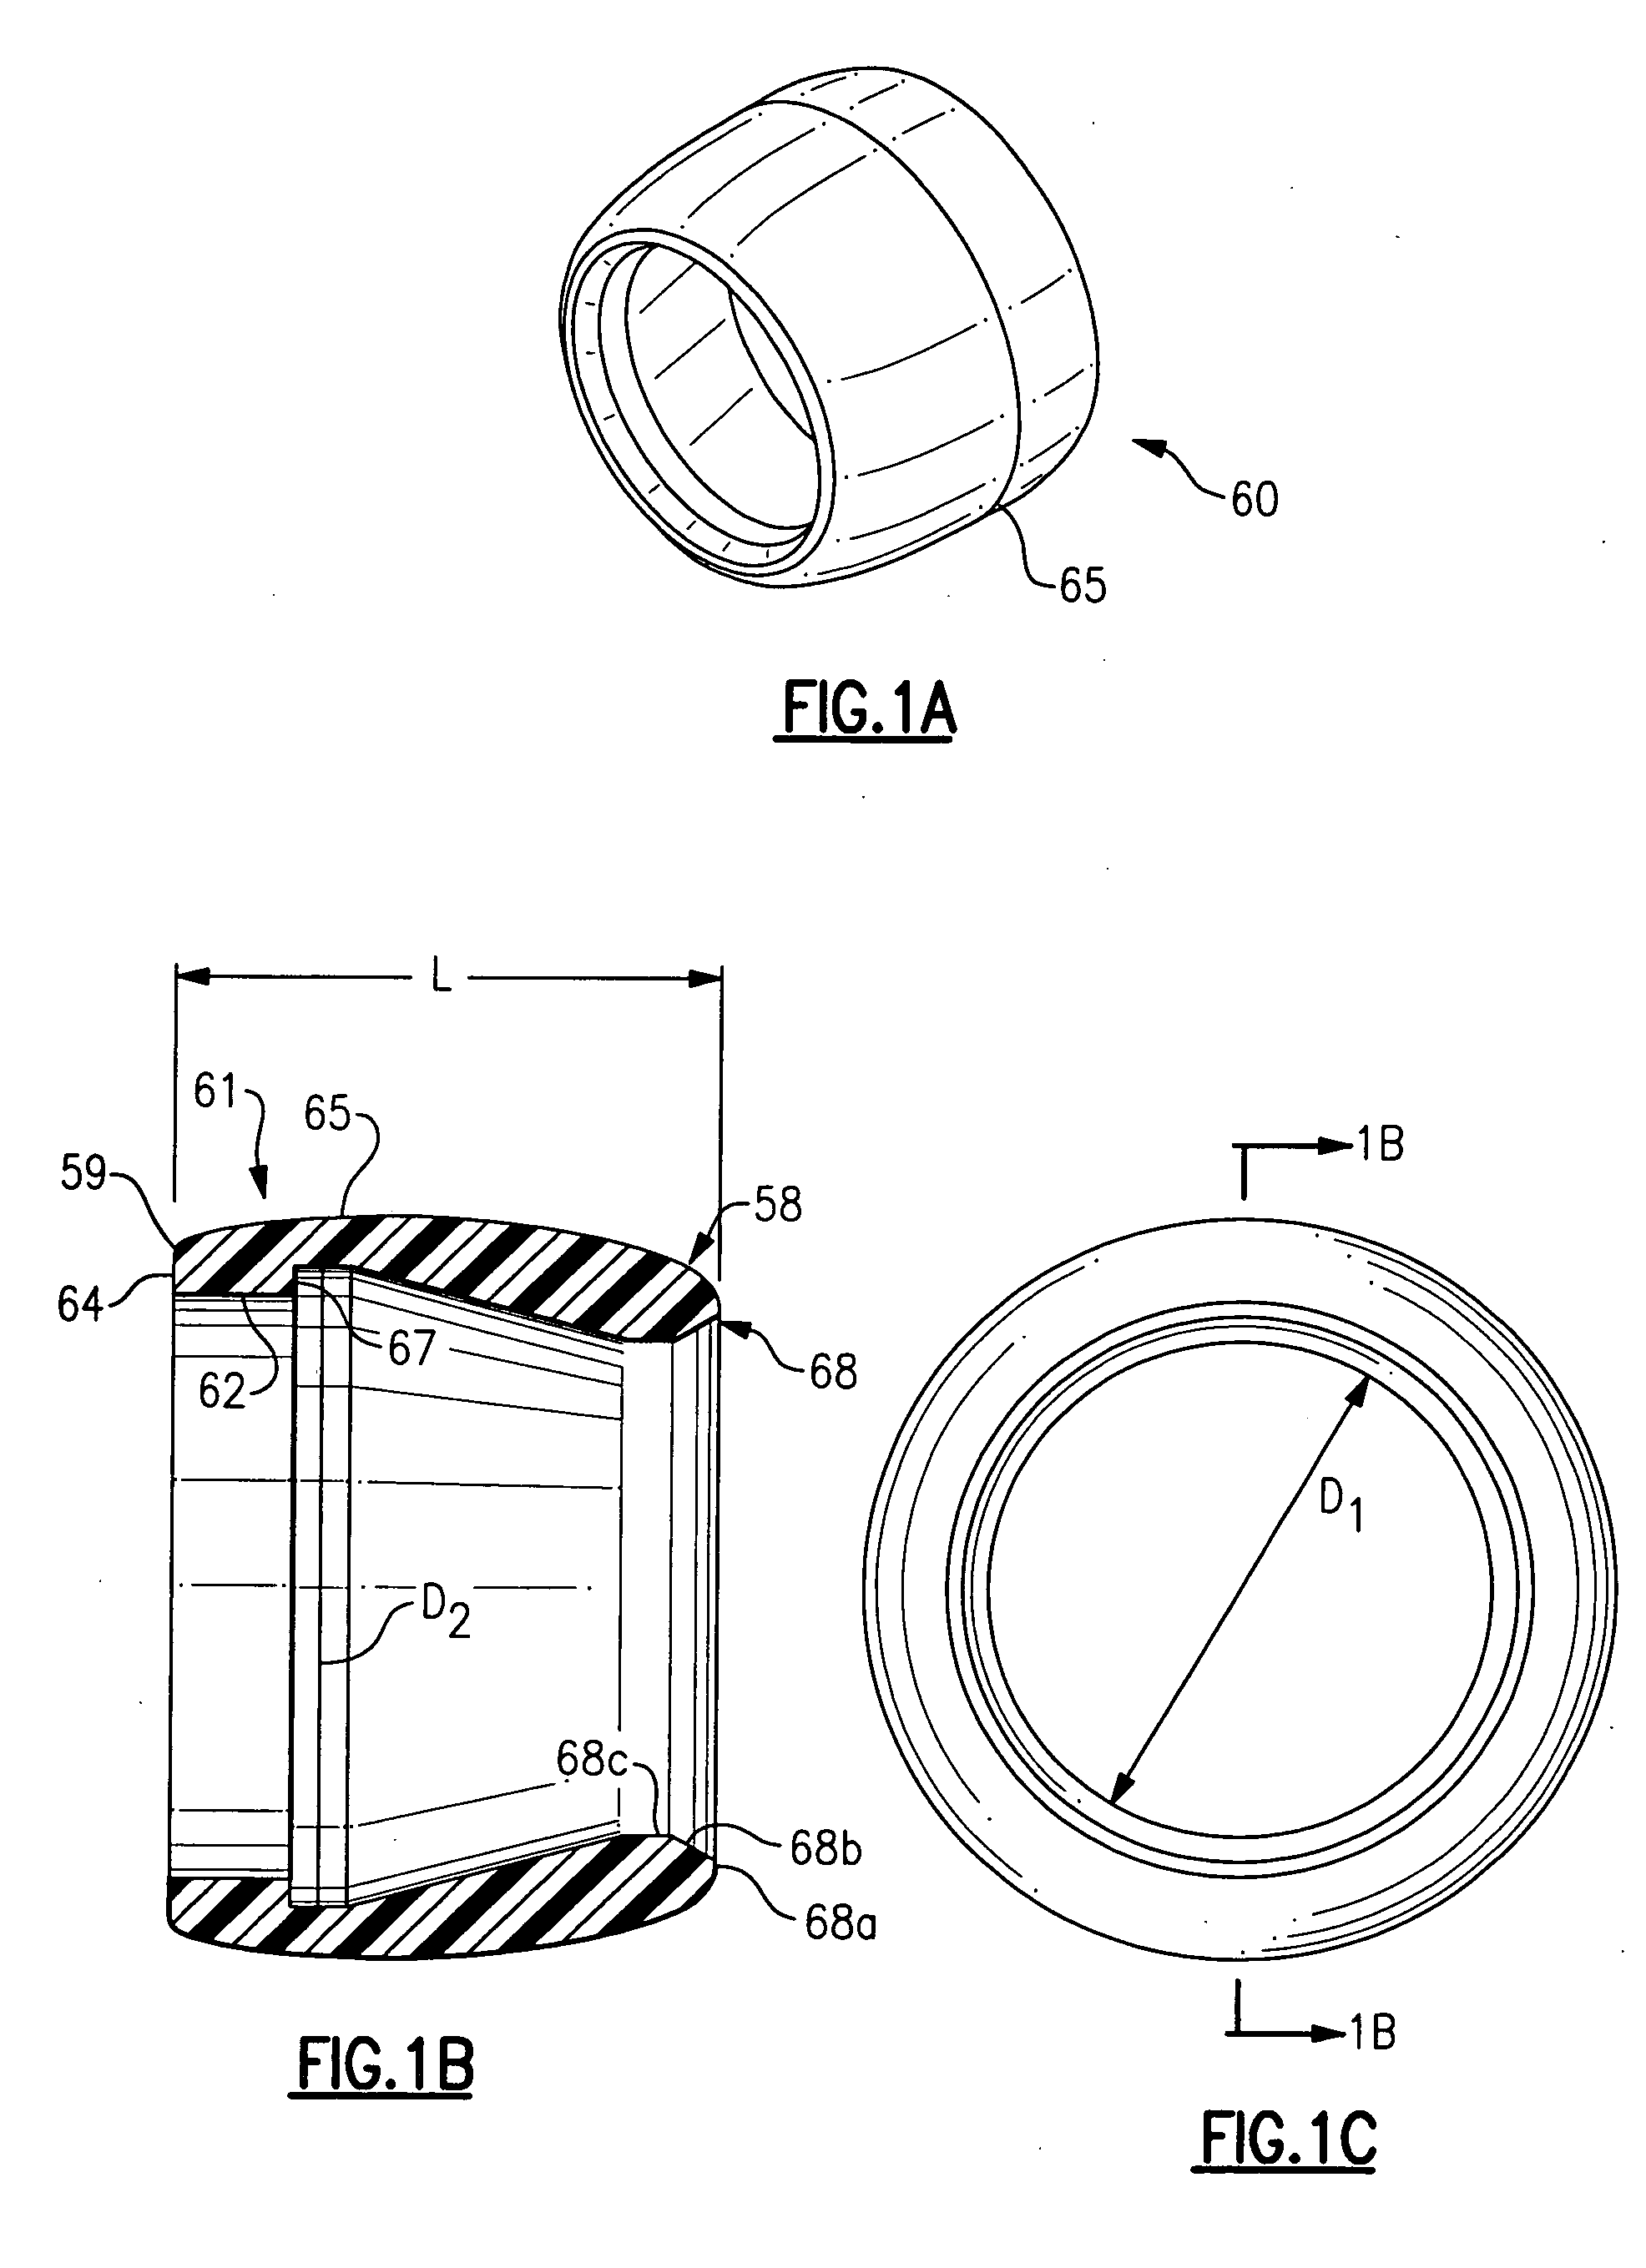 Nut seal assembly for coaxial cable system components